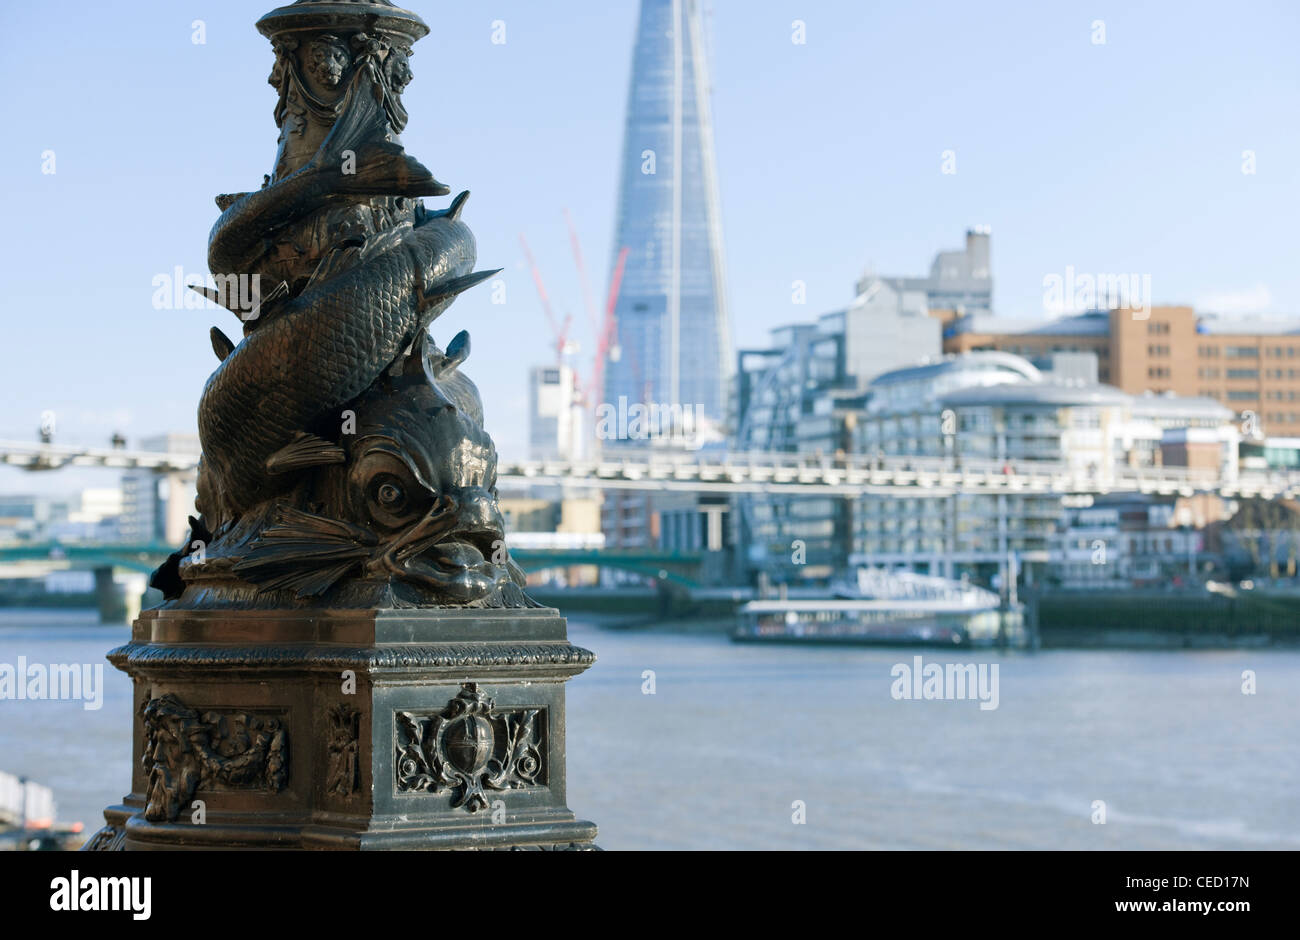 Cast iron Victorian lamp base in shape of a fish with The Shard building in the background on a clear sunny day Stock Photo